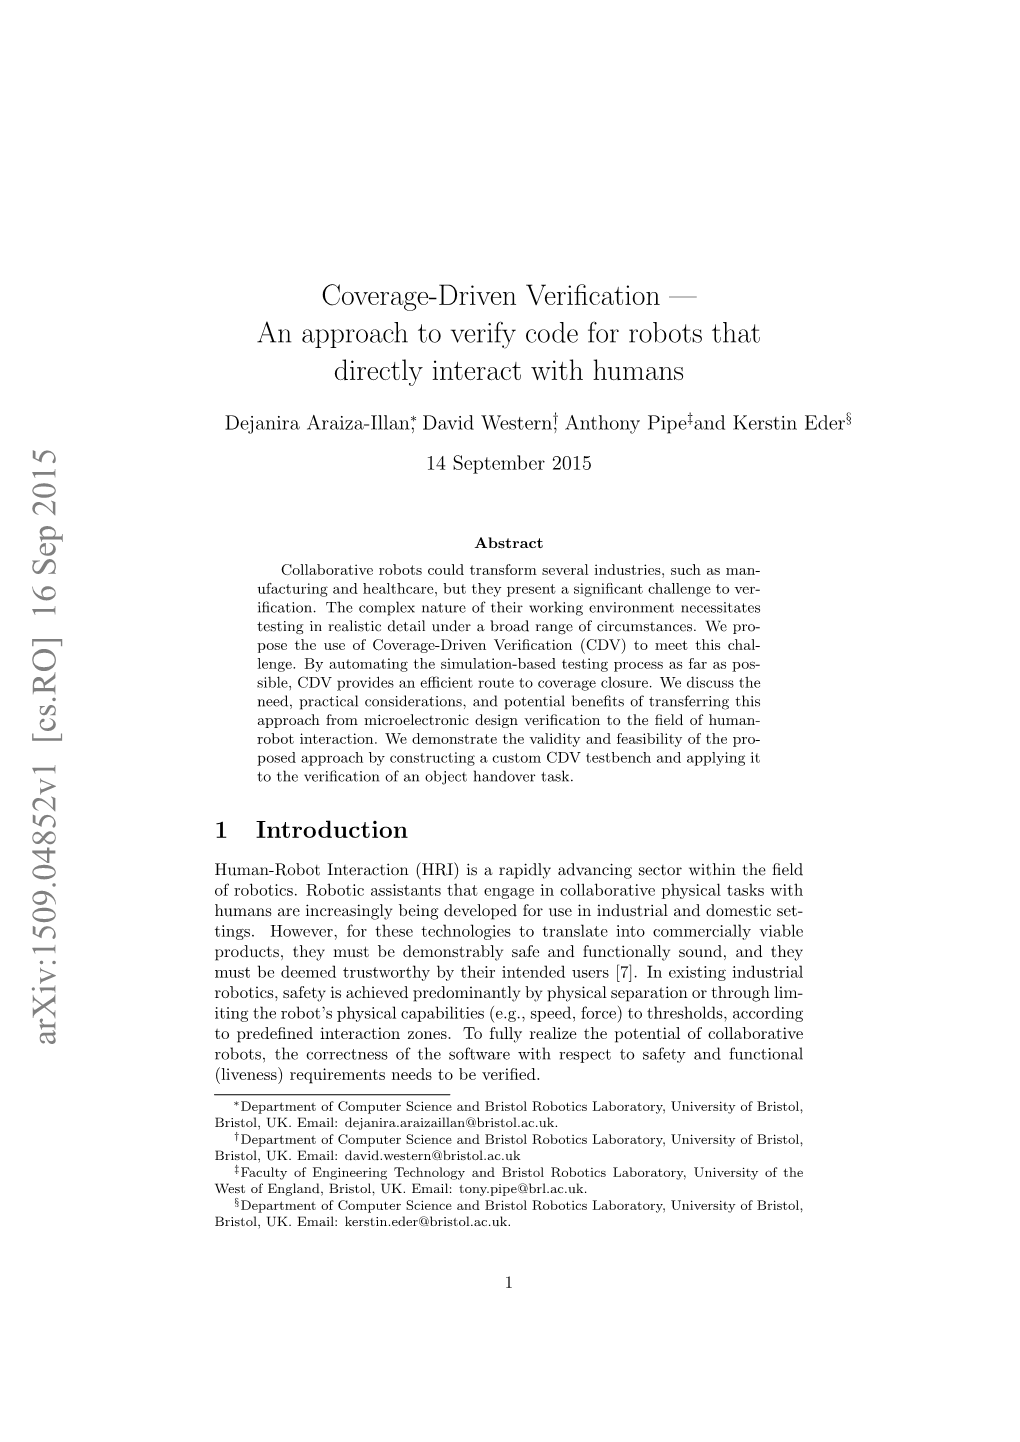 Coverage-Driven Verification — an Approach to Verify Code for Robots